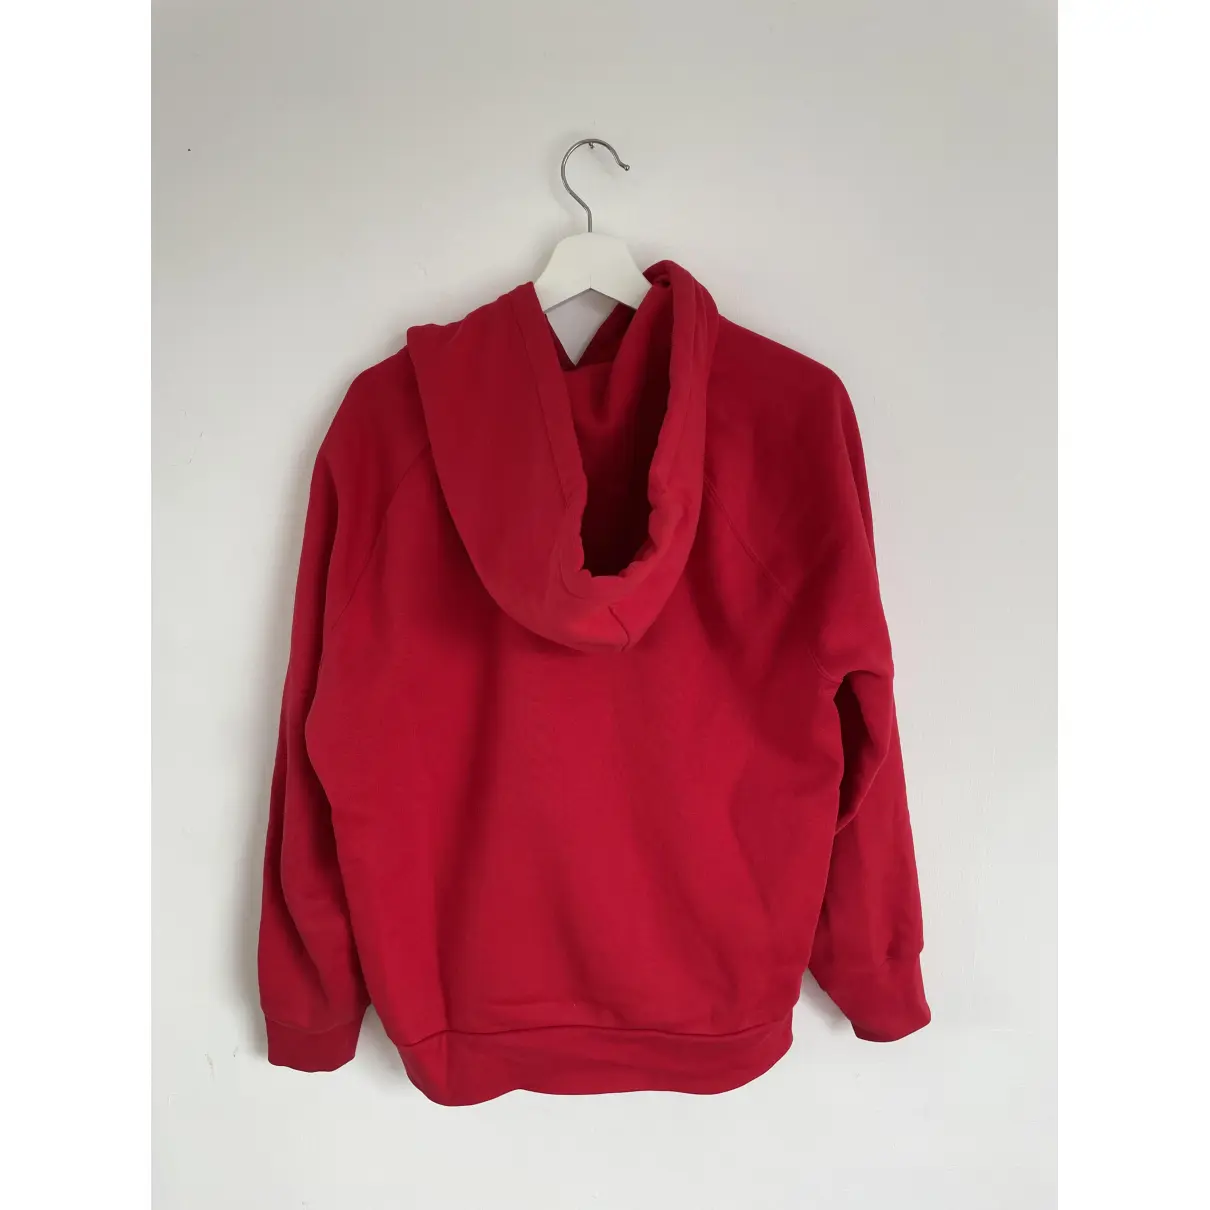 Buy Burberry Red Cotton Knitwear online